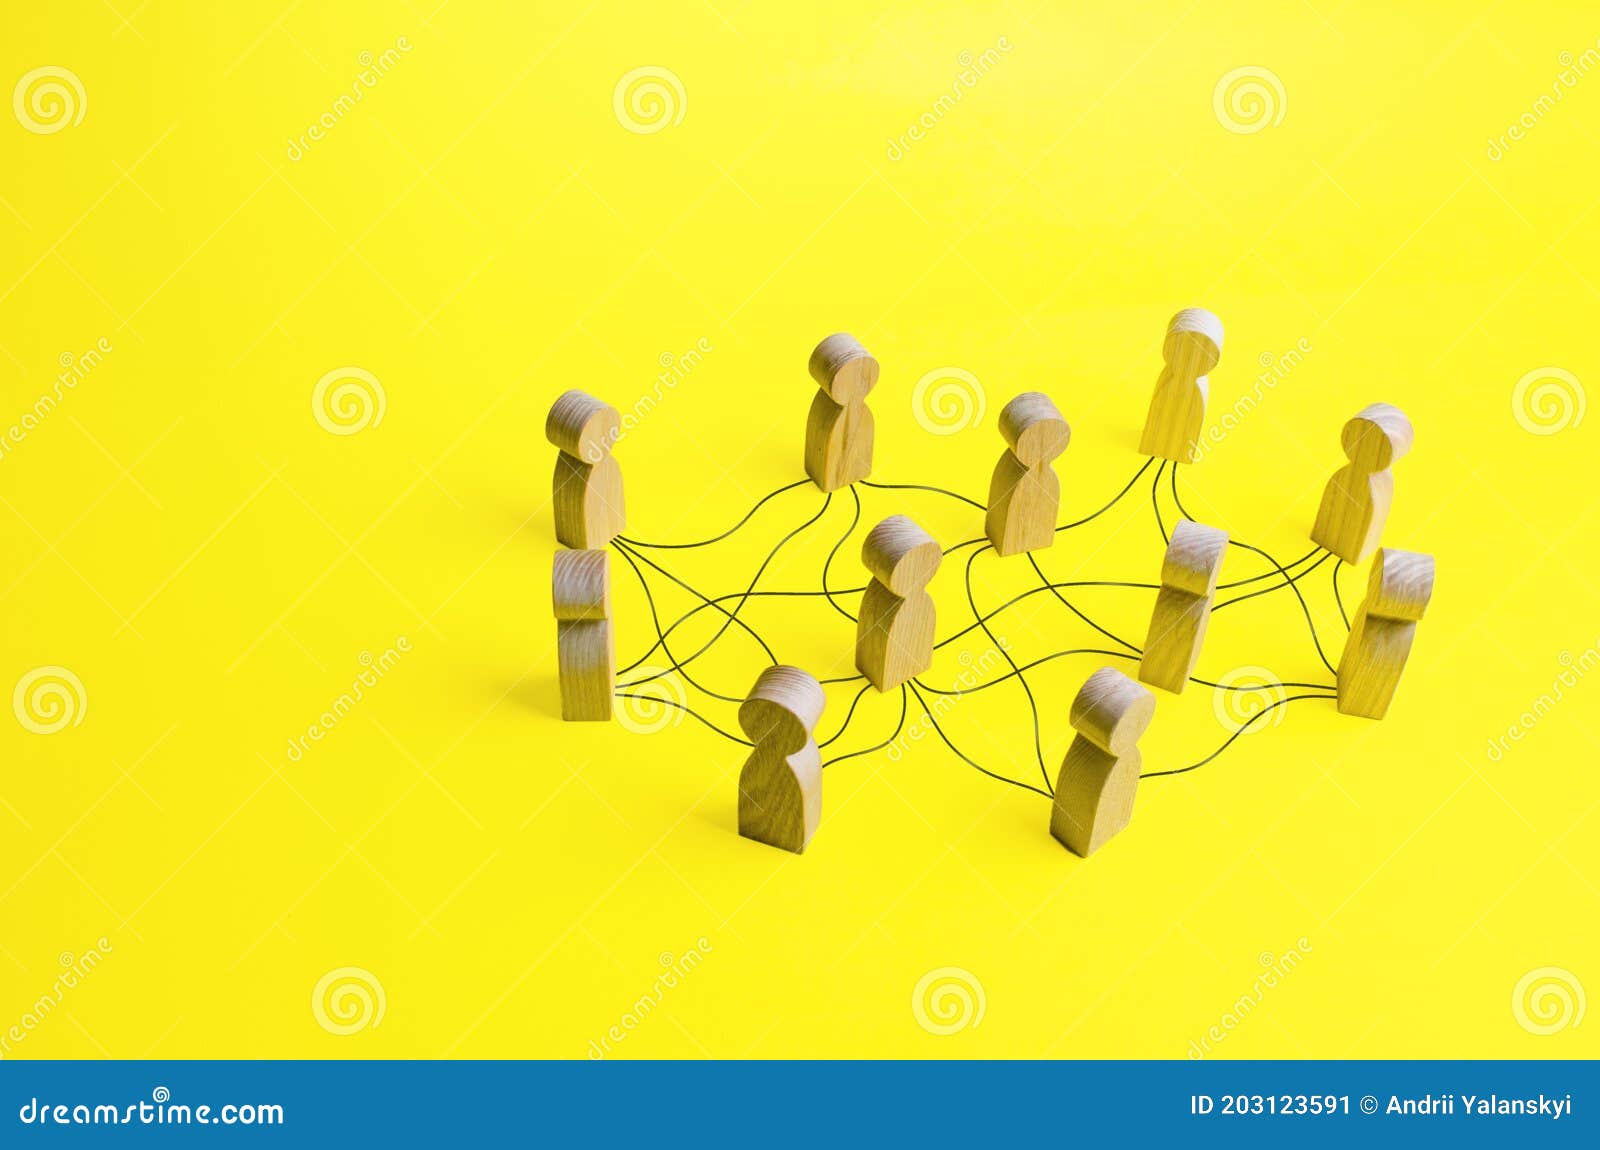 people connected by a network of lines. communication, building business relationships. unconventional company structure